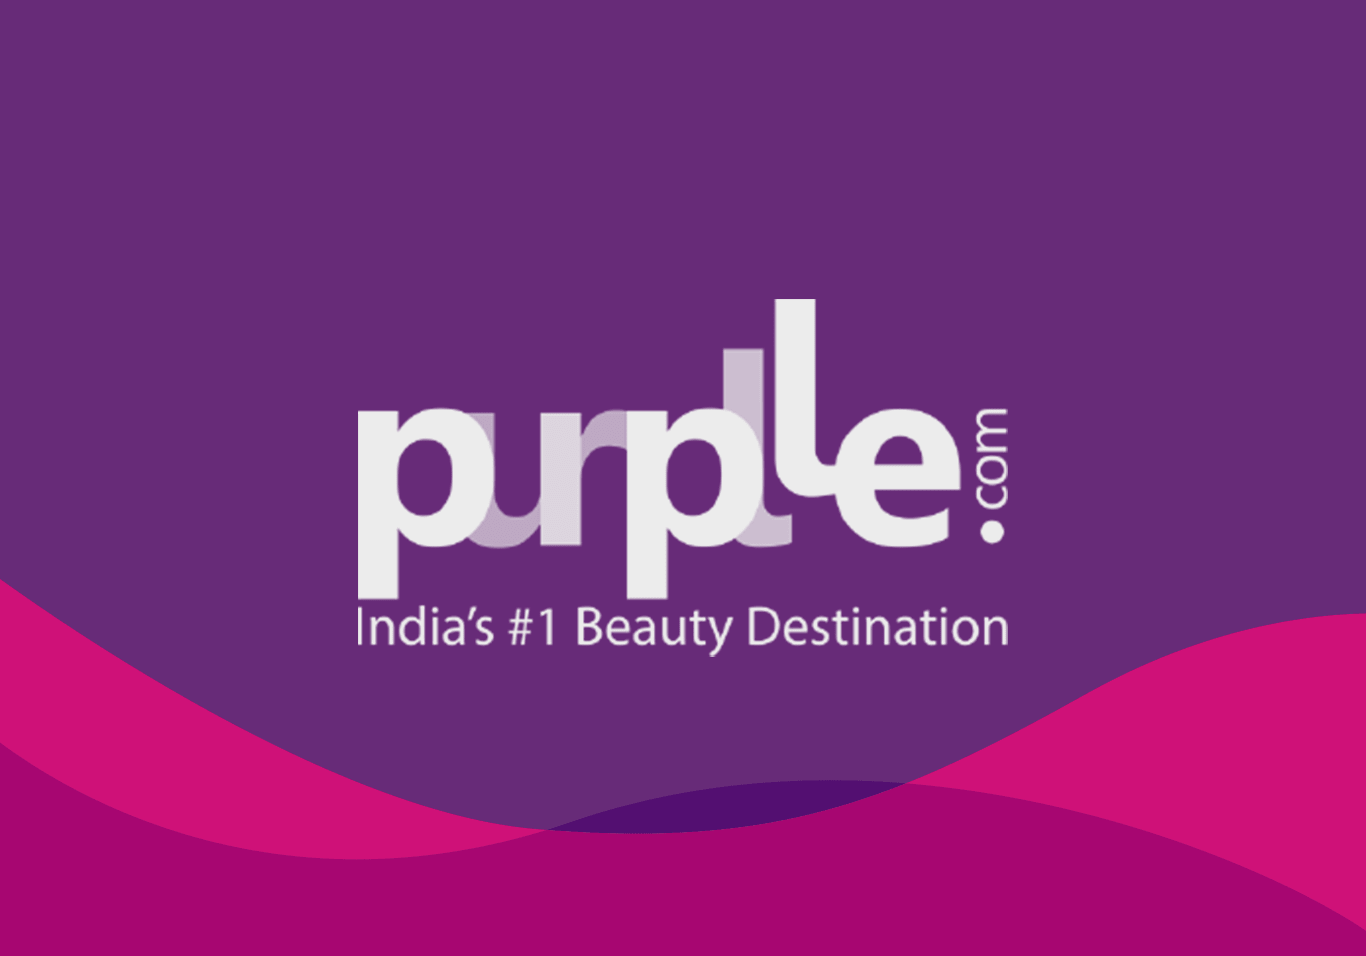 BEST SITES TO BUY SKINCARE PRODUCTS IN INDIA